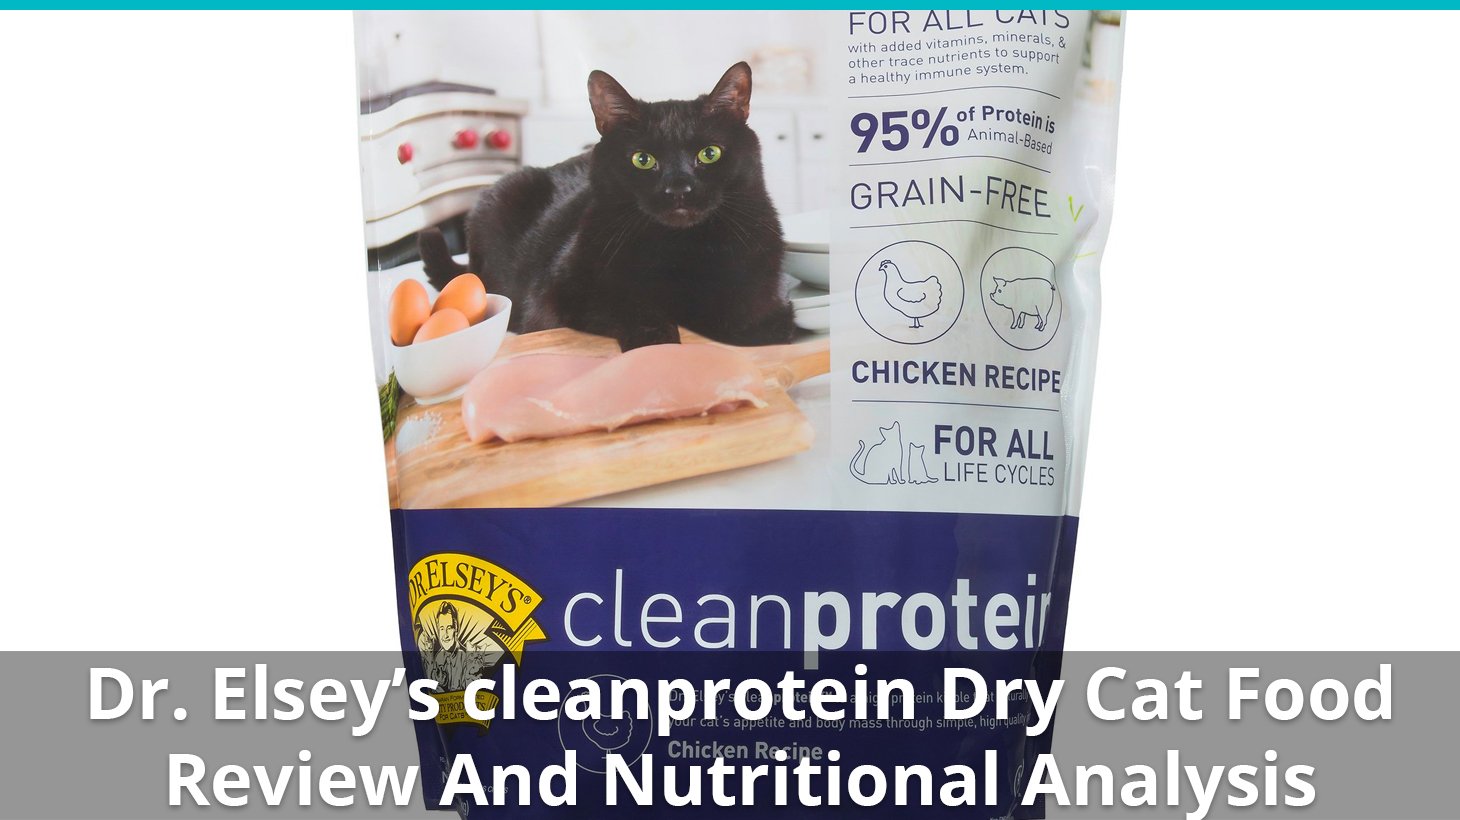 Dr. Elsey's cleanprotein Cat Food (Dry) Review And Nutrition Analysis